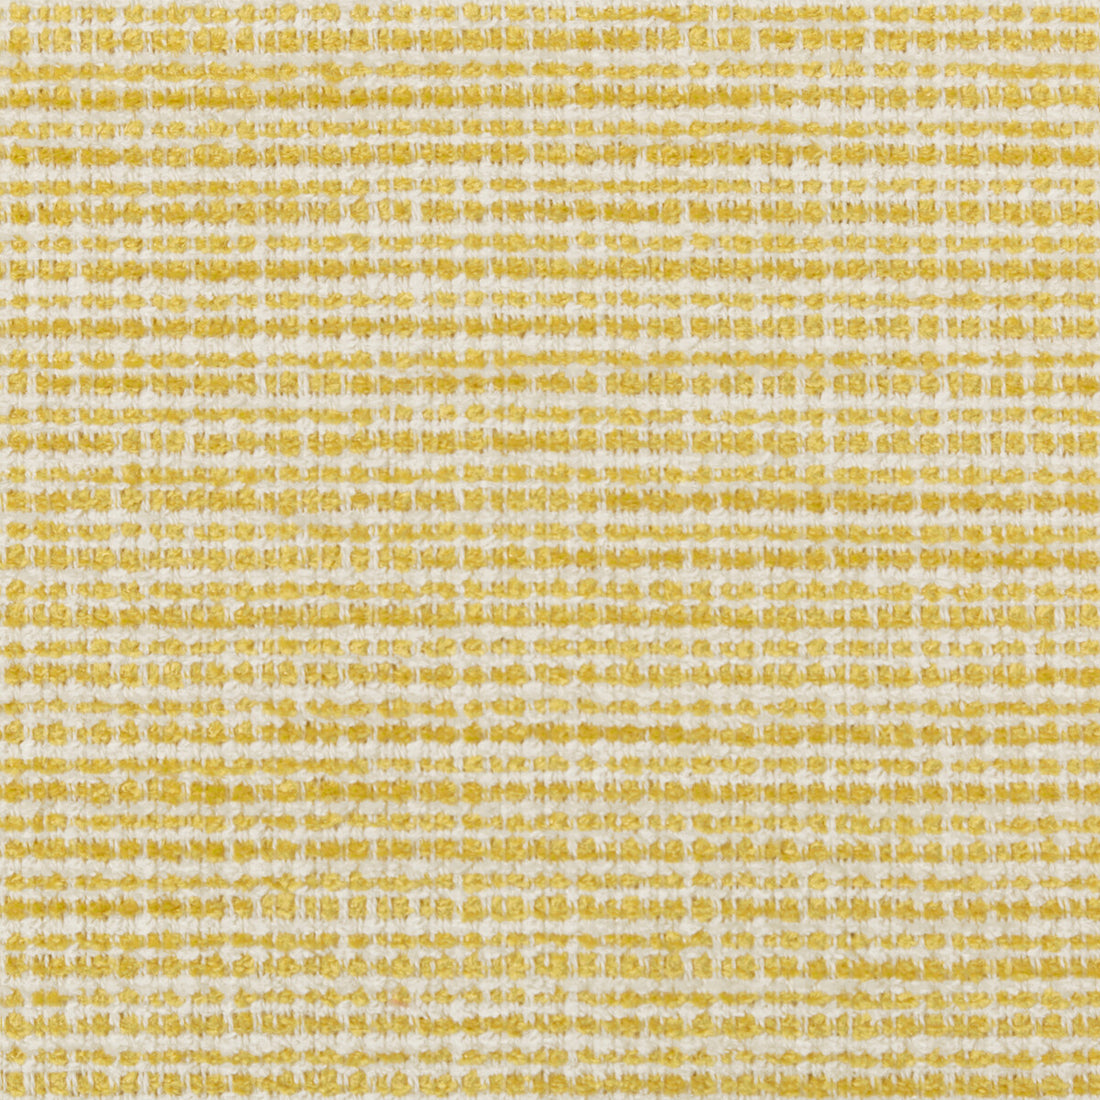 Freney Texture fabric in yellow color - pattern 8019149.40.0 - by Brunschwig &amp; Fils in the Chambery Textures II collection